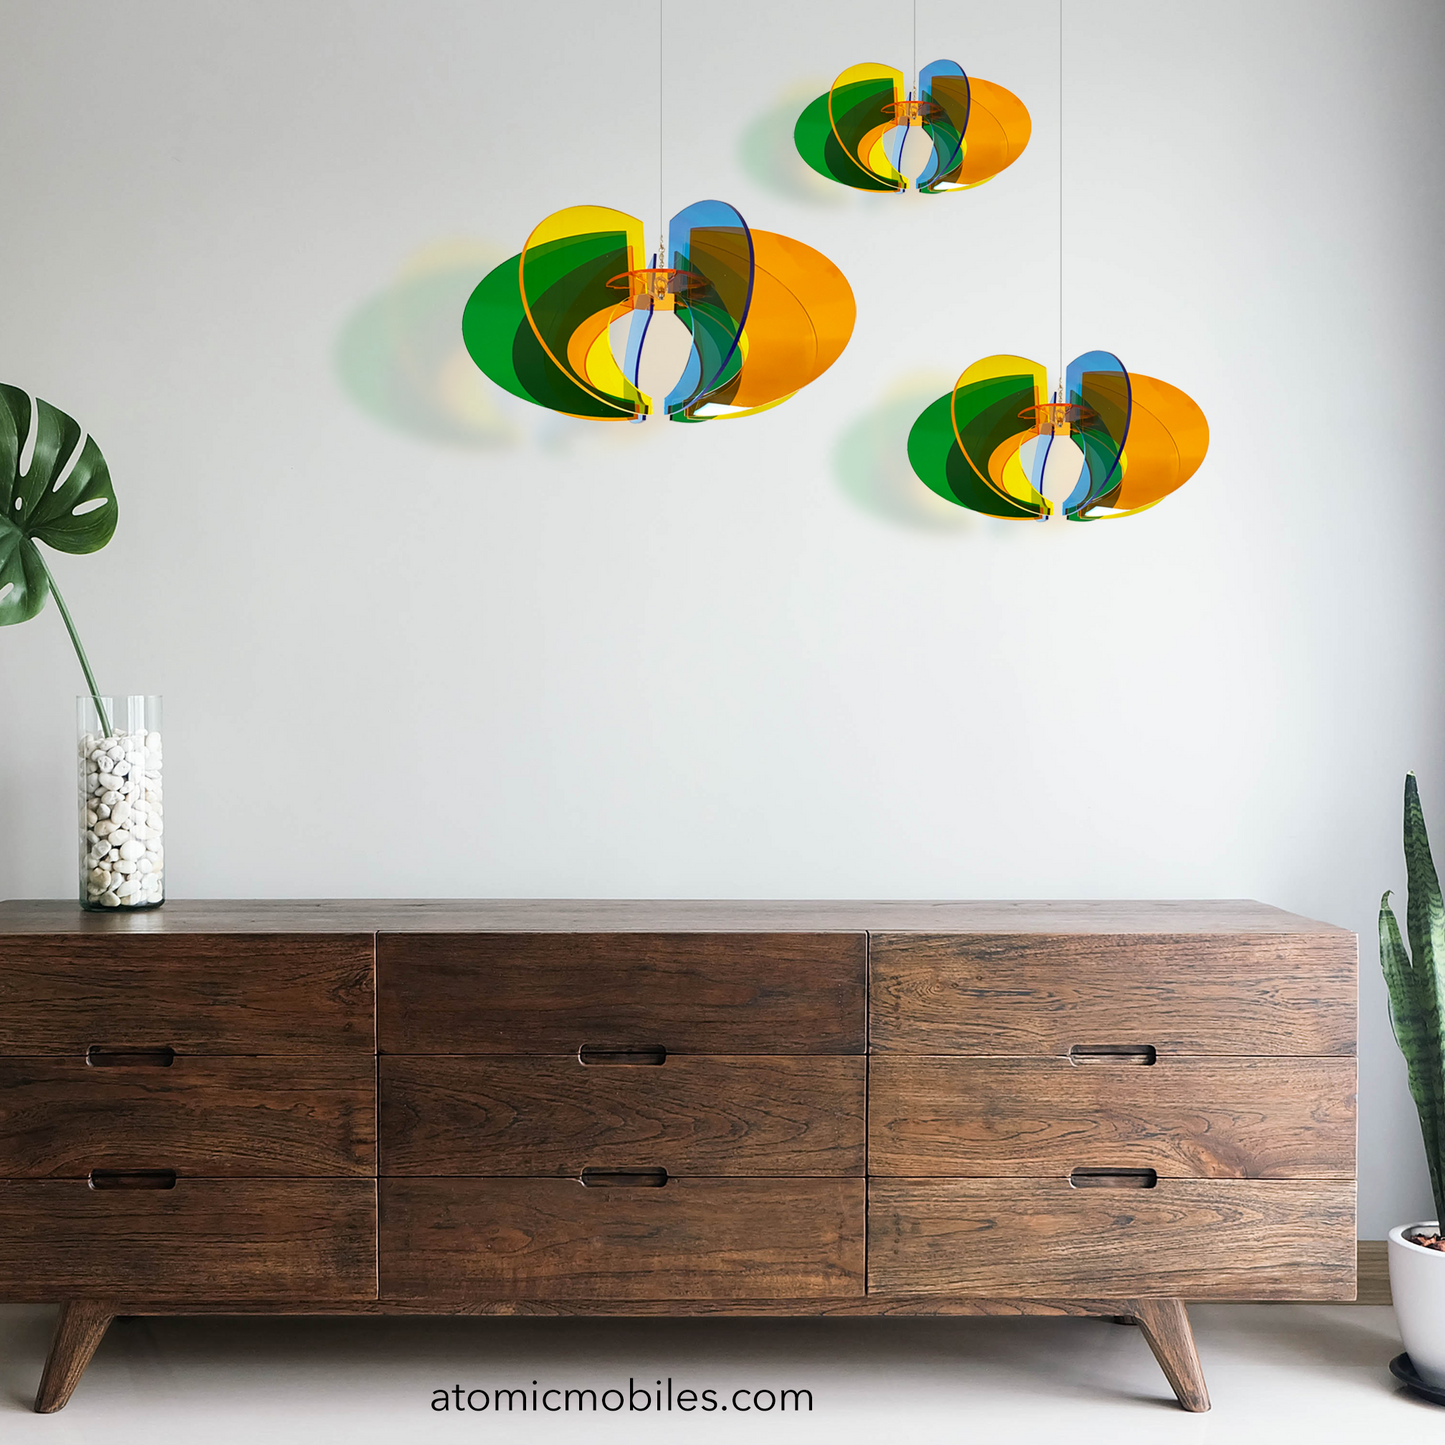 Beautiful grouping of 3 Space Age Orbit  RotaMobiles in 3 sizes with wood credenza and plants - hanging rotating art mobiles by AtomicMobiles.com